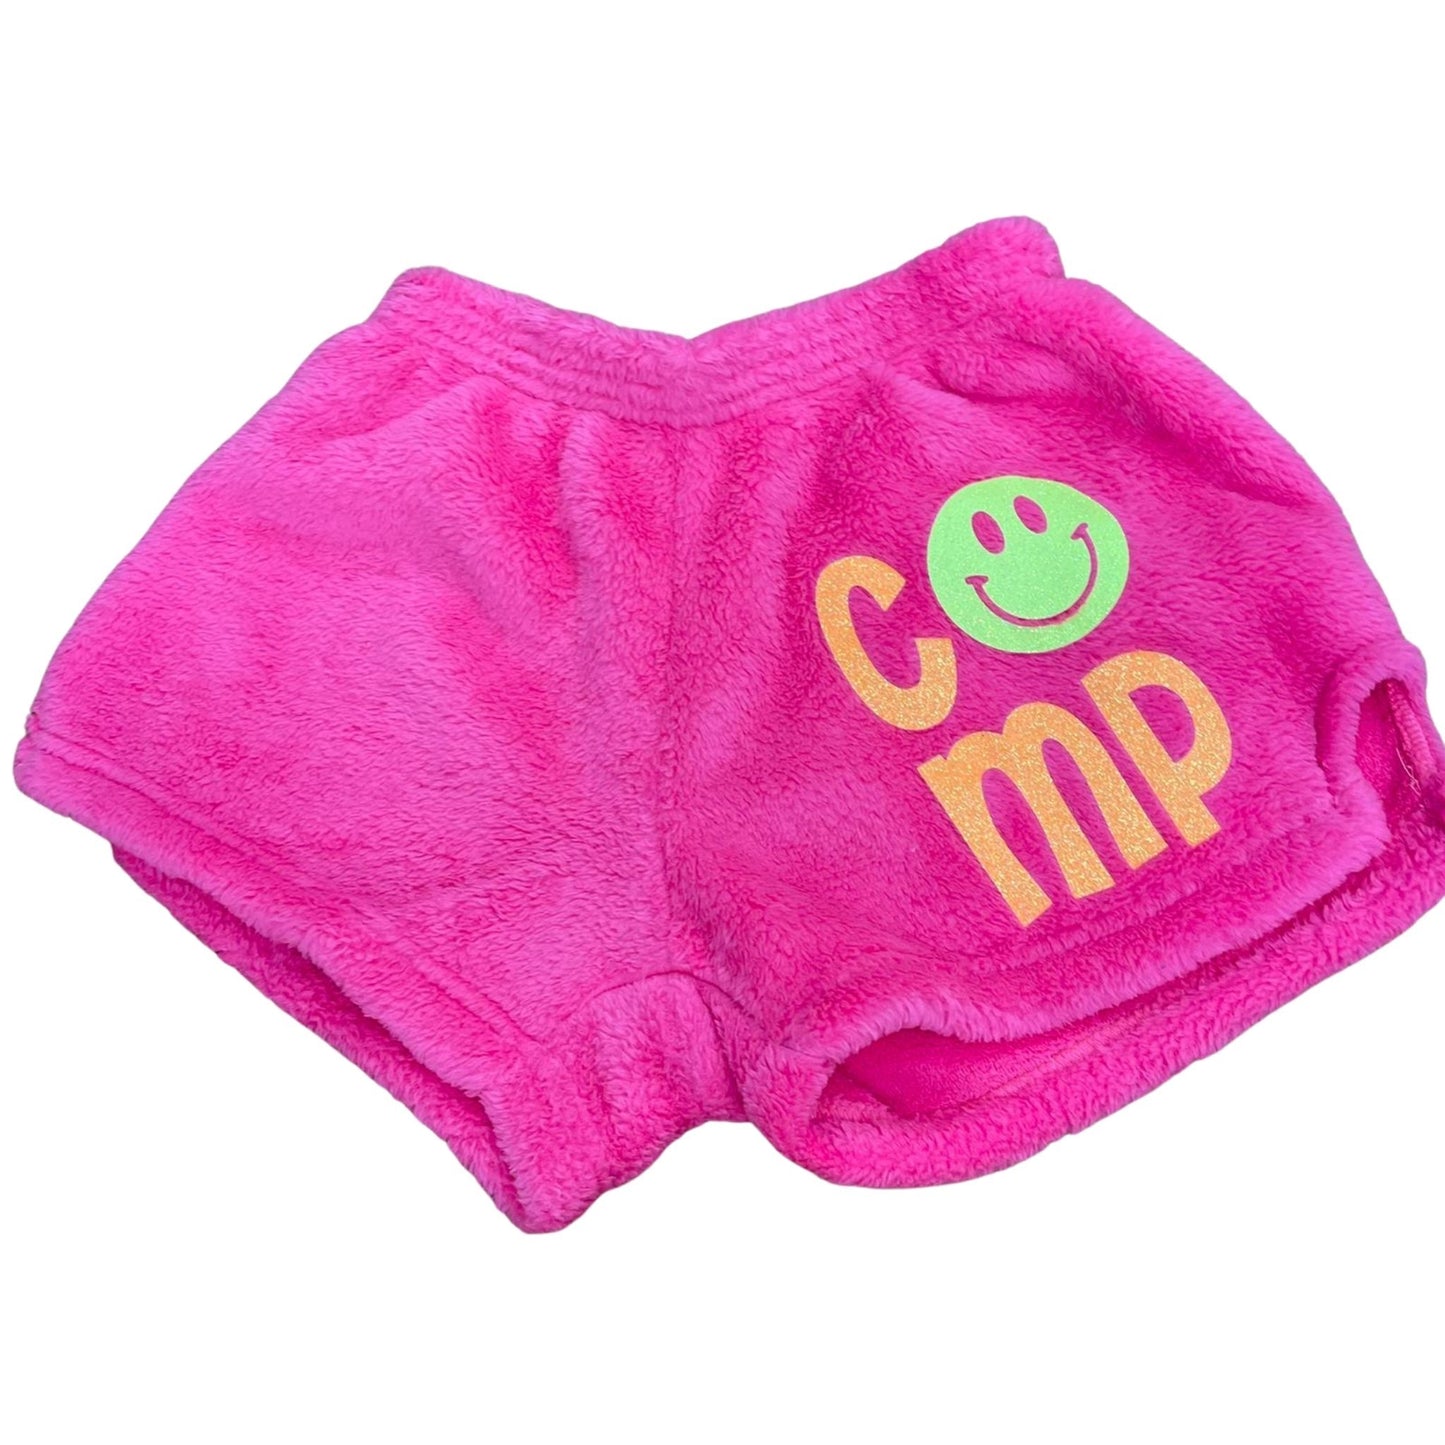 Made with Love & Kisses Comfy Camp Shorts - a Spirit Animal - Camp Shorts $30-$45 Camp Camp Shorts